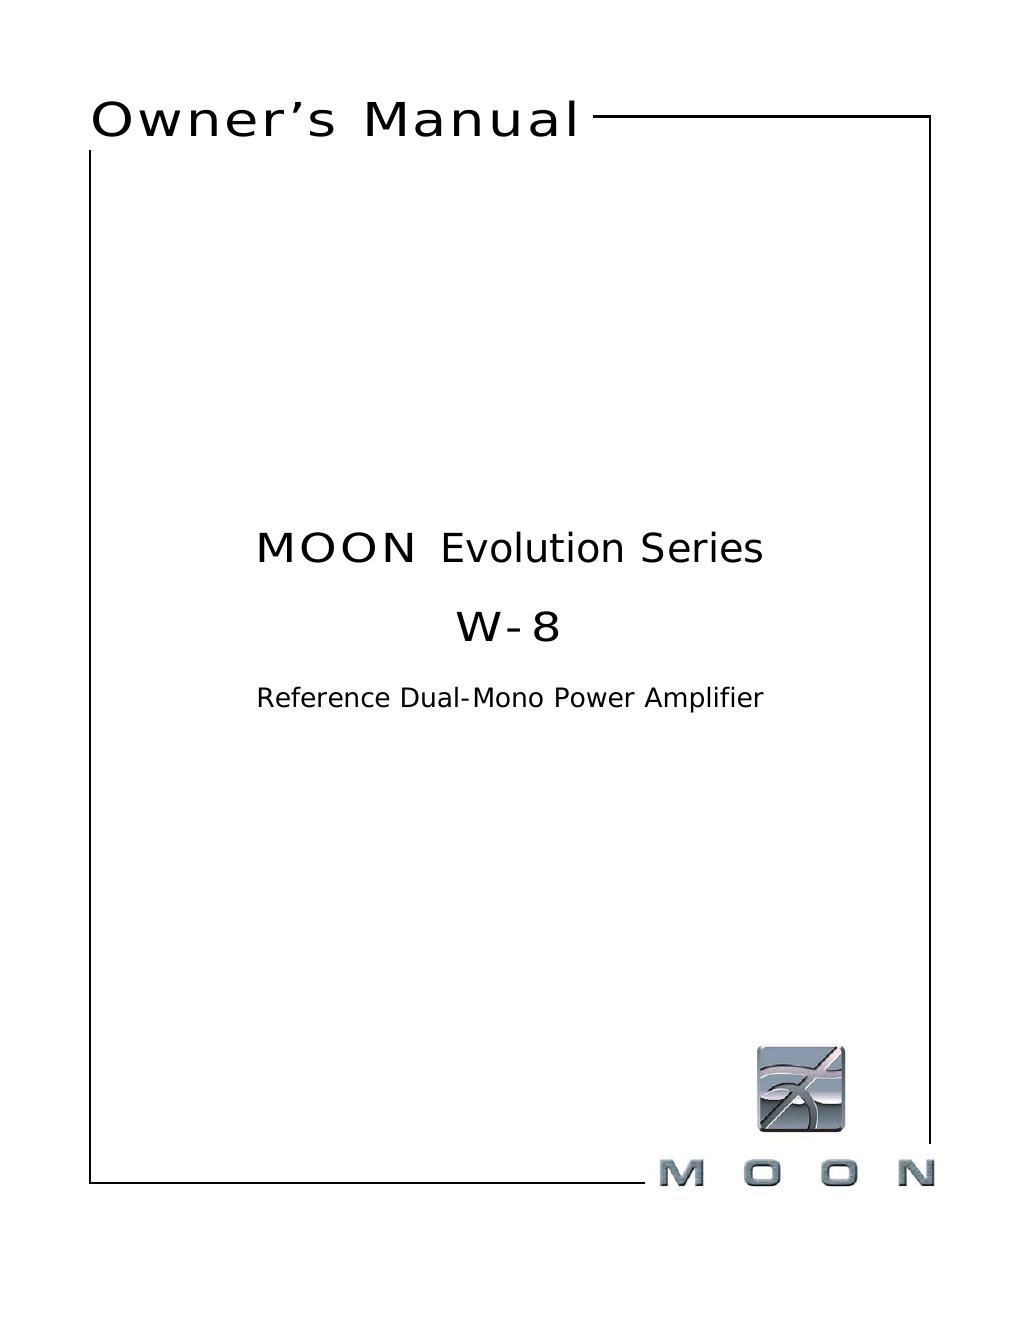 moon w 8 owners manual